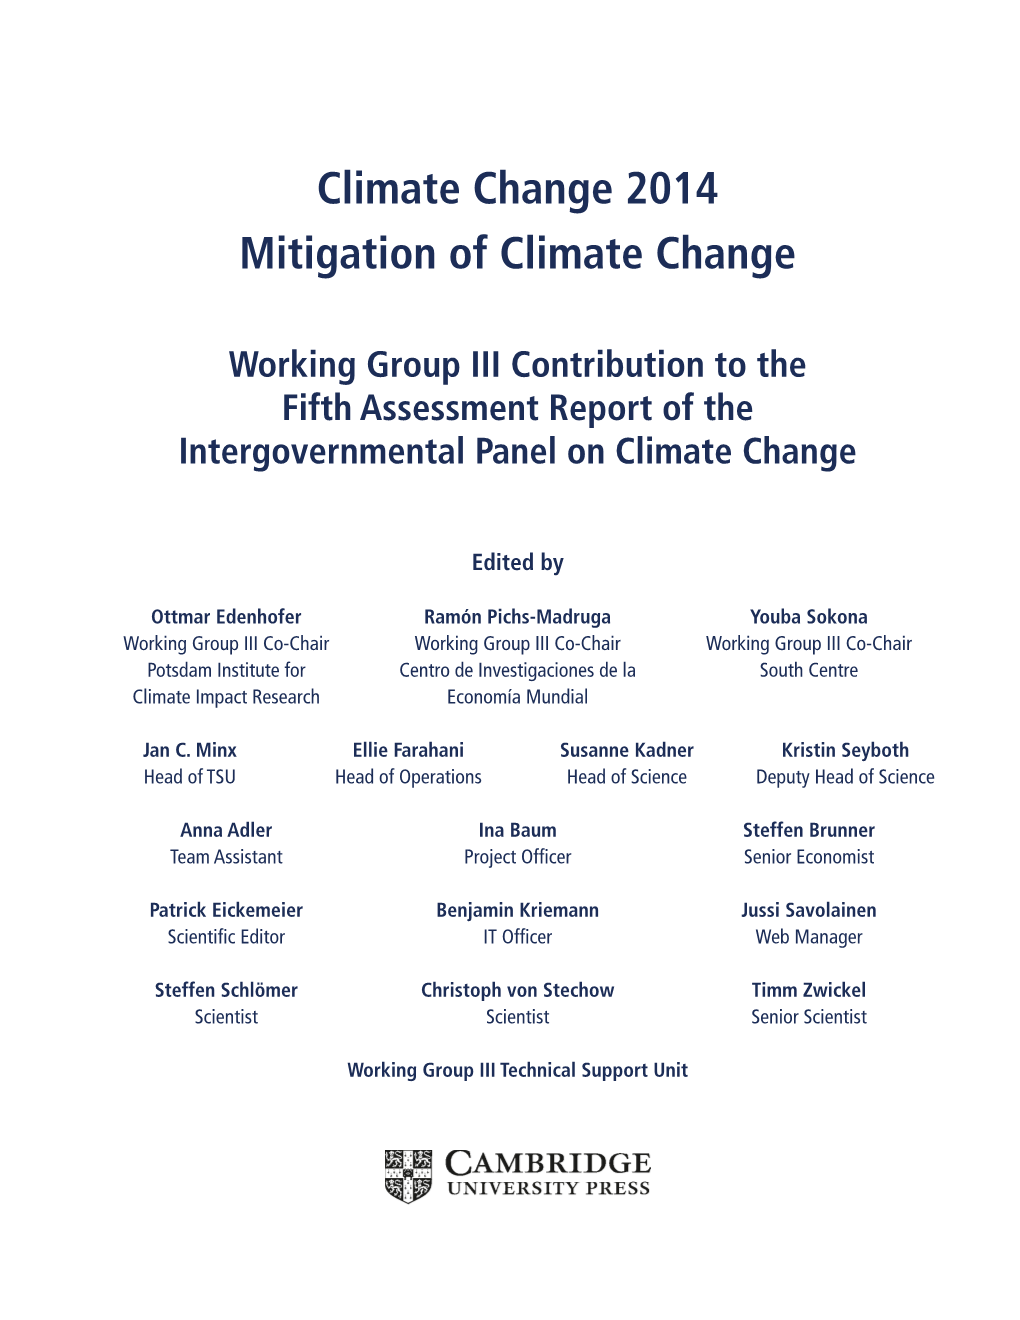 Climate Change 2014 Mitigation of Climate Change